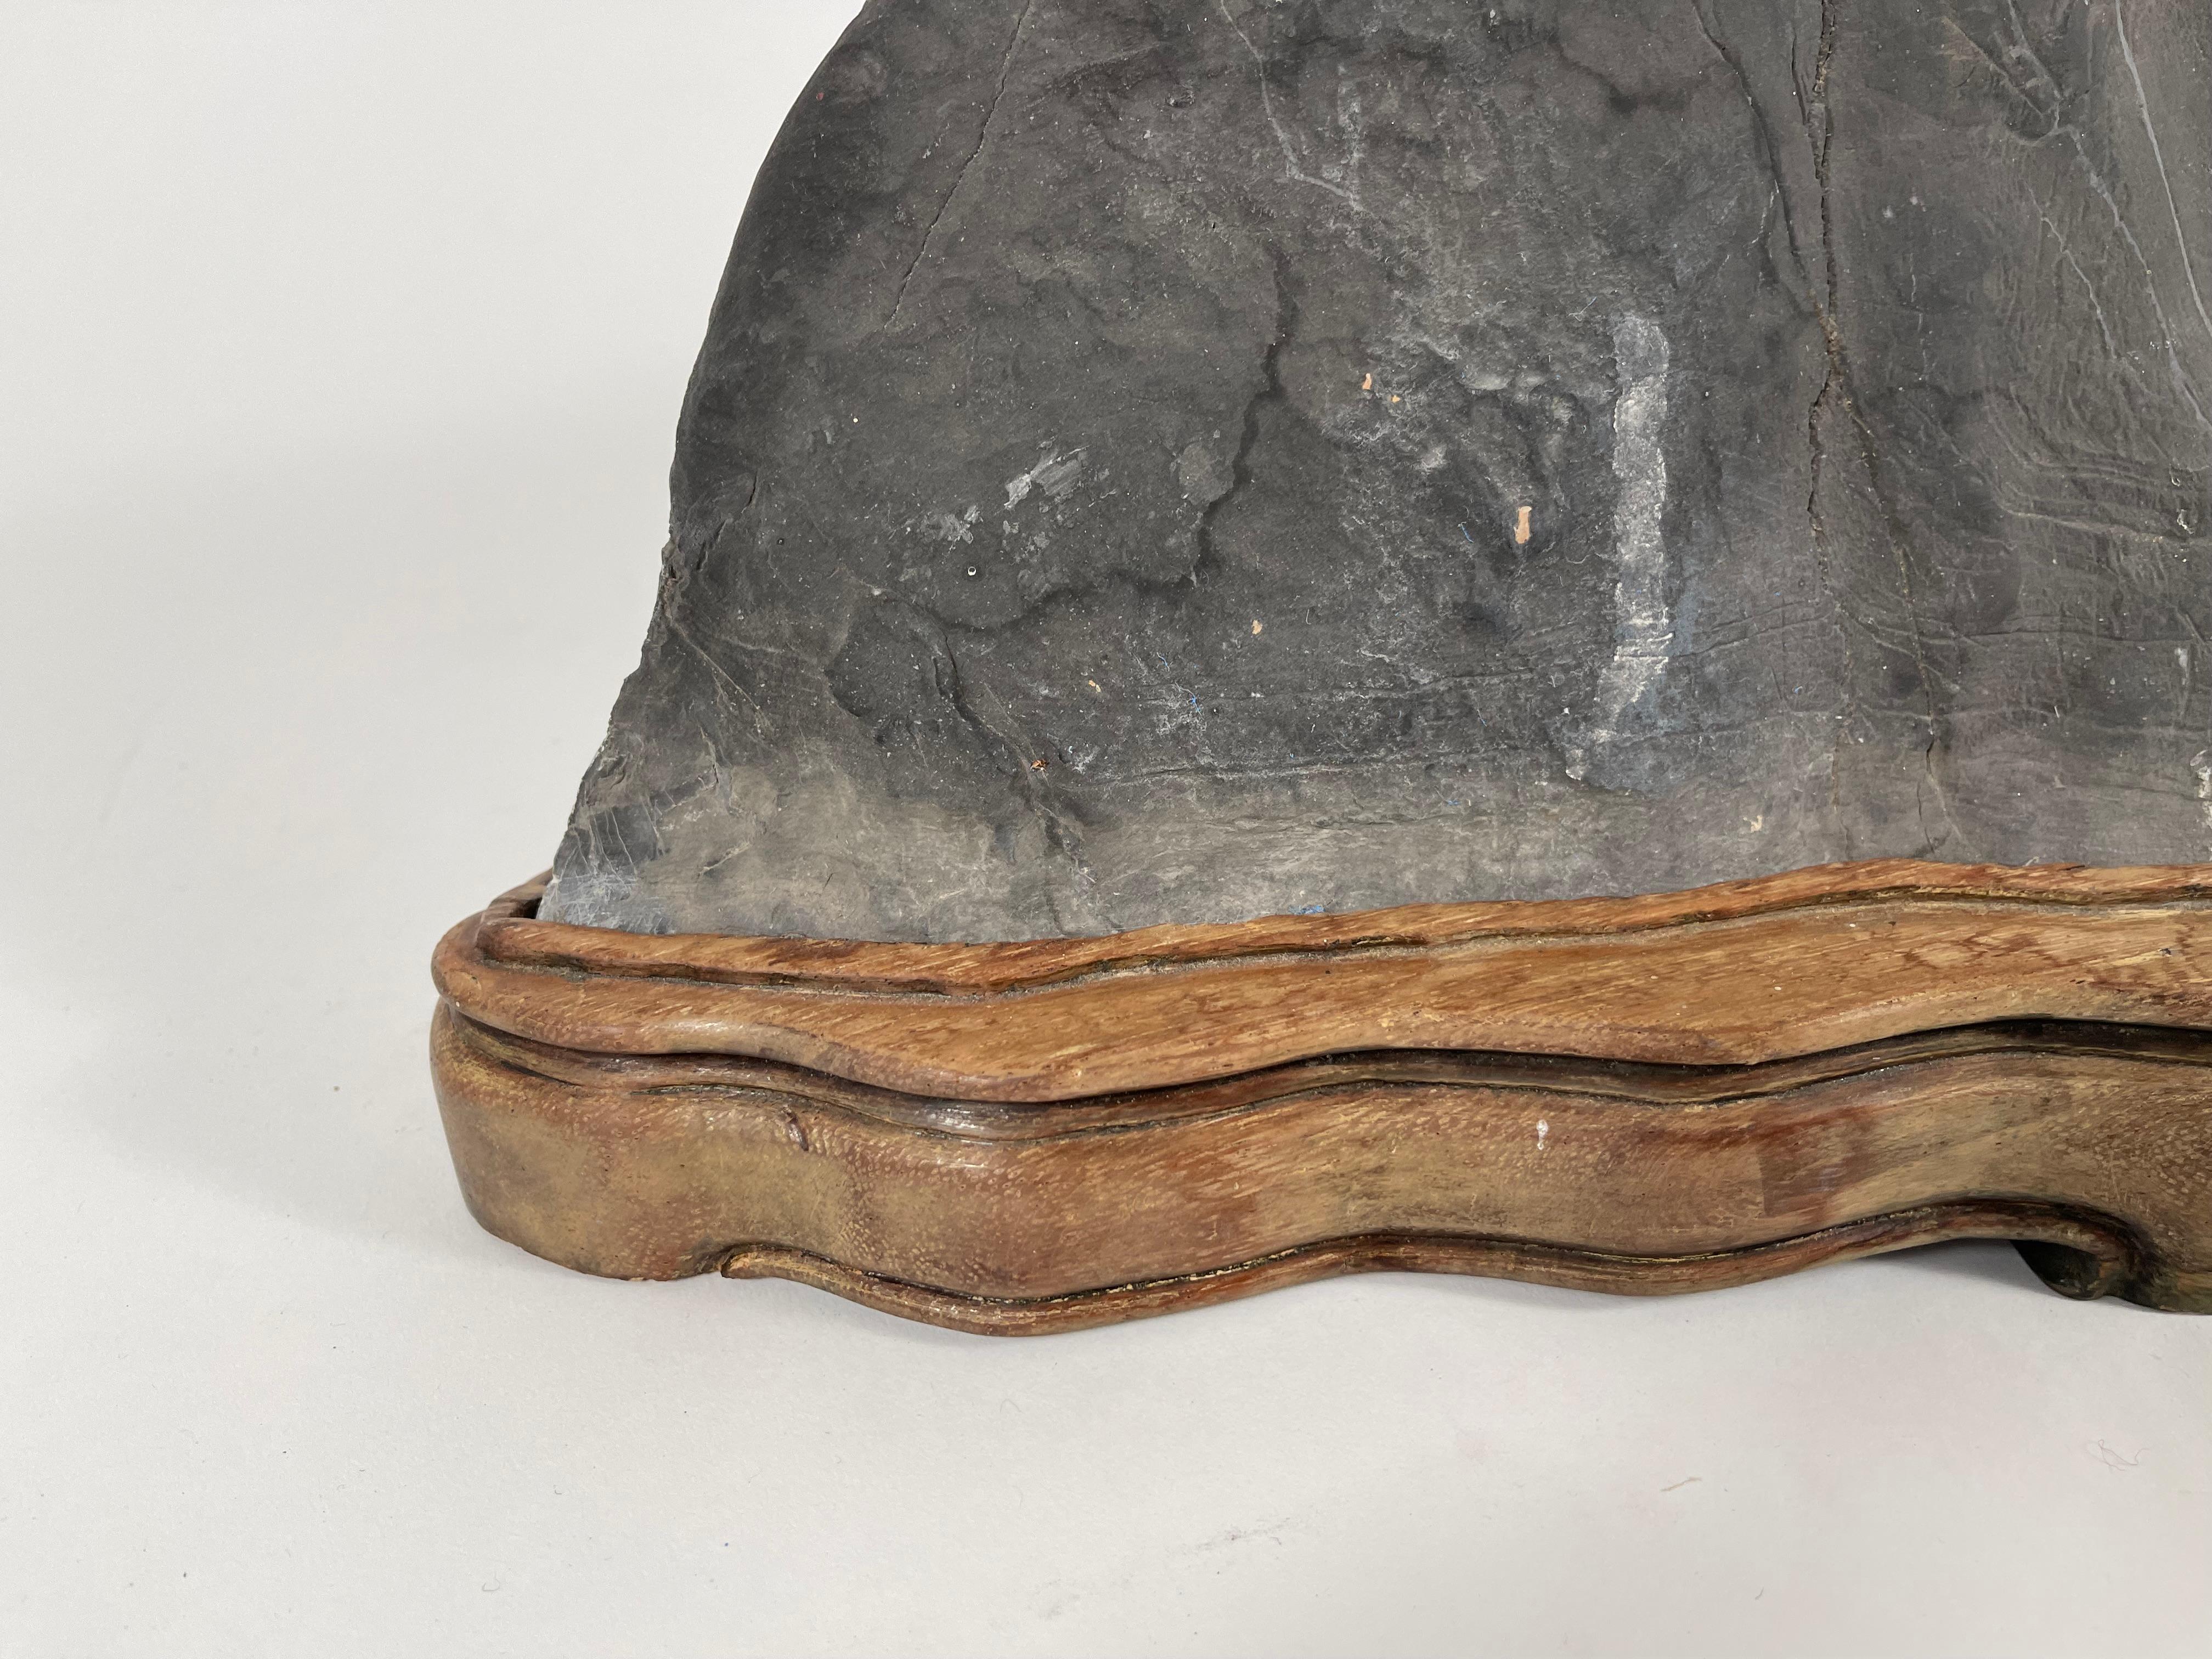 A Chinese or Japanese scholar's rock resembling a mountain range, this specimen with white veins, crevices and smooth peaks, is mounted on a conforming carved wood base. Known as Gongshi in Chinese, and Suiseki in Japanese, scholar's rocks are